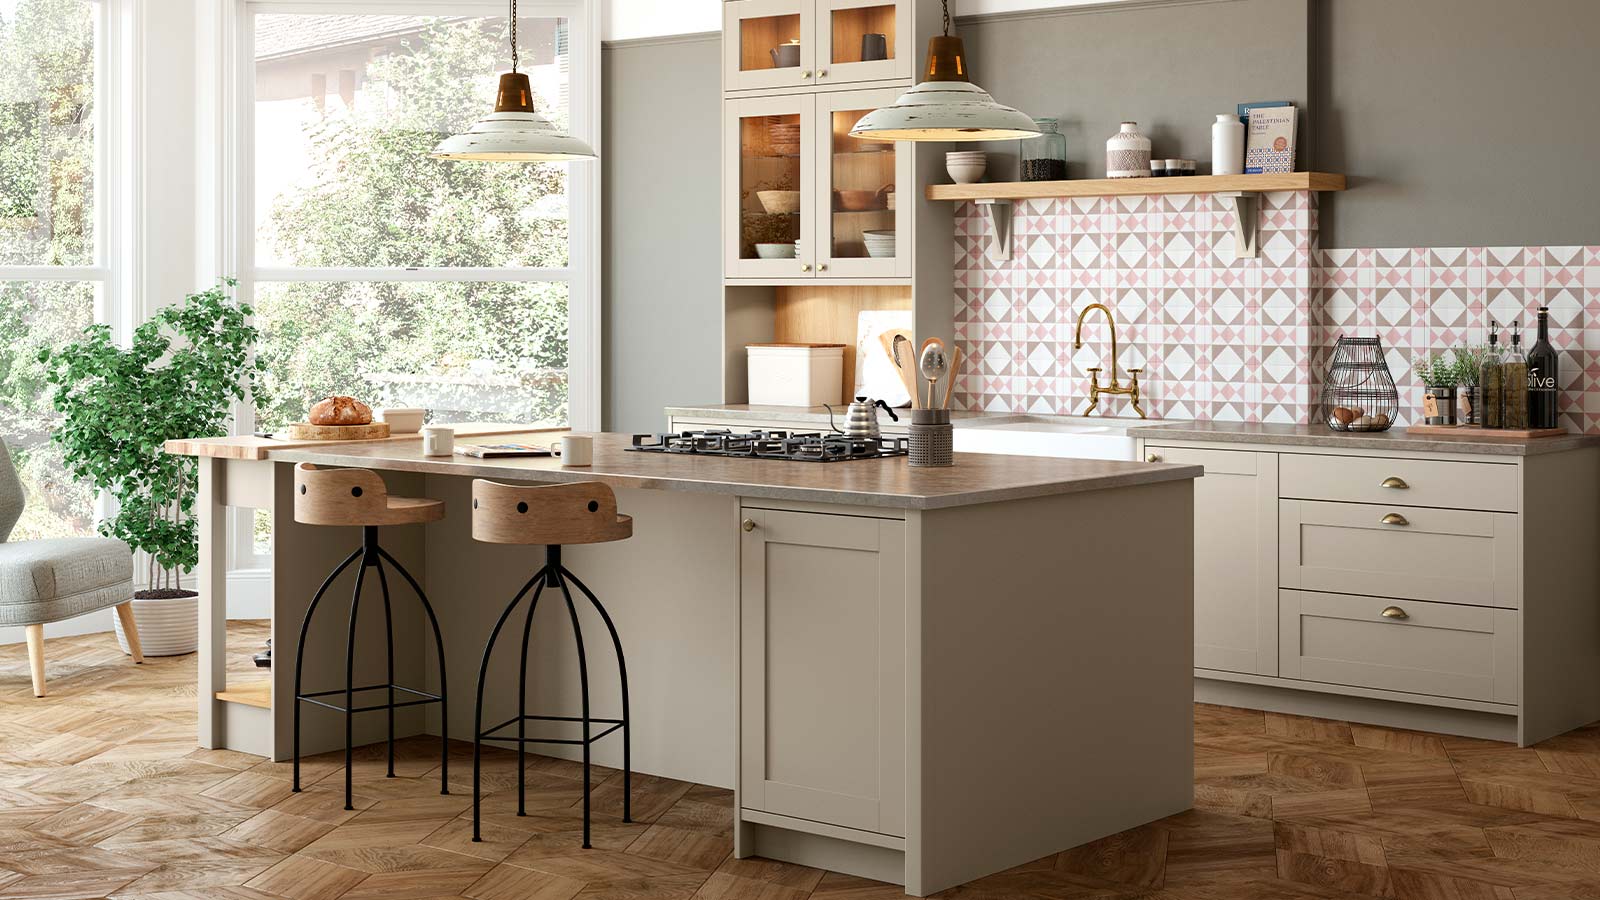 Six beautiful kitchen design trends to keep your eye on in 2021